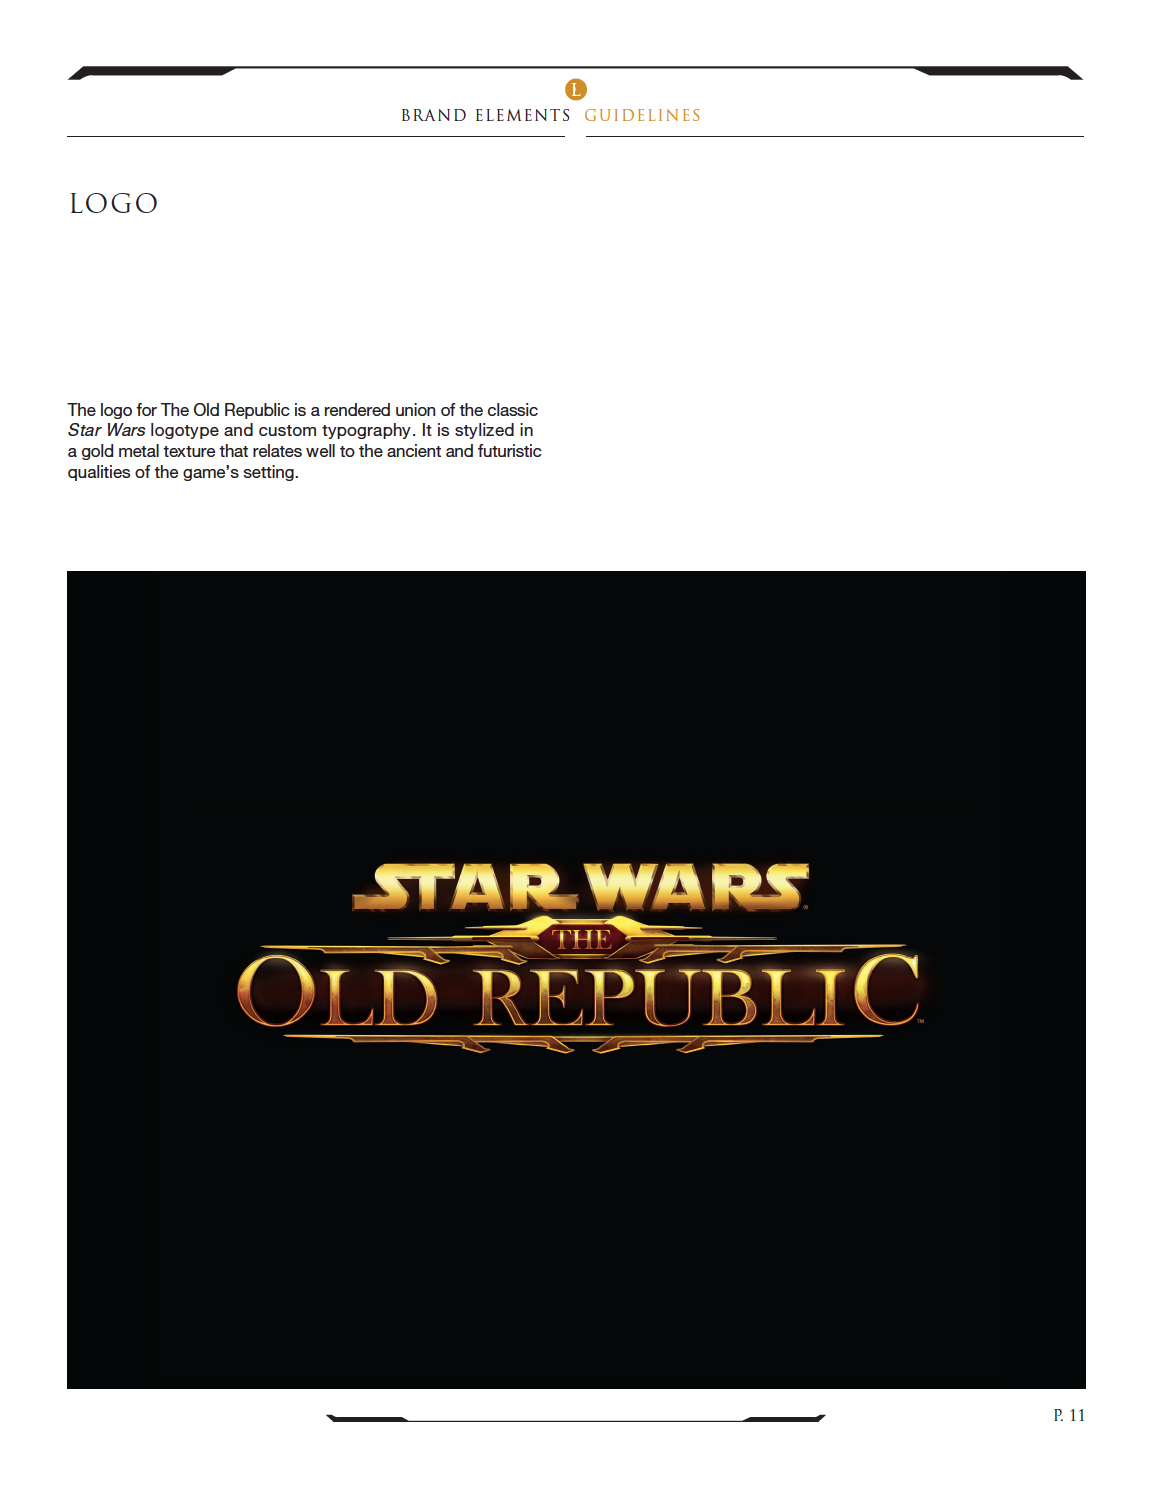 SWTOR-08.png